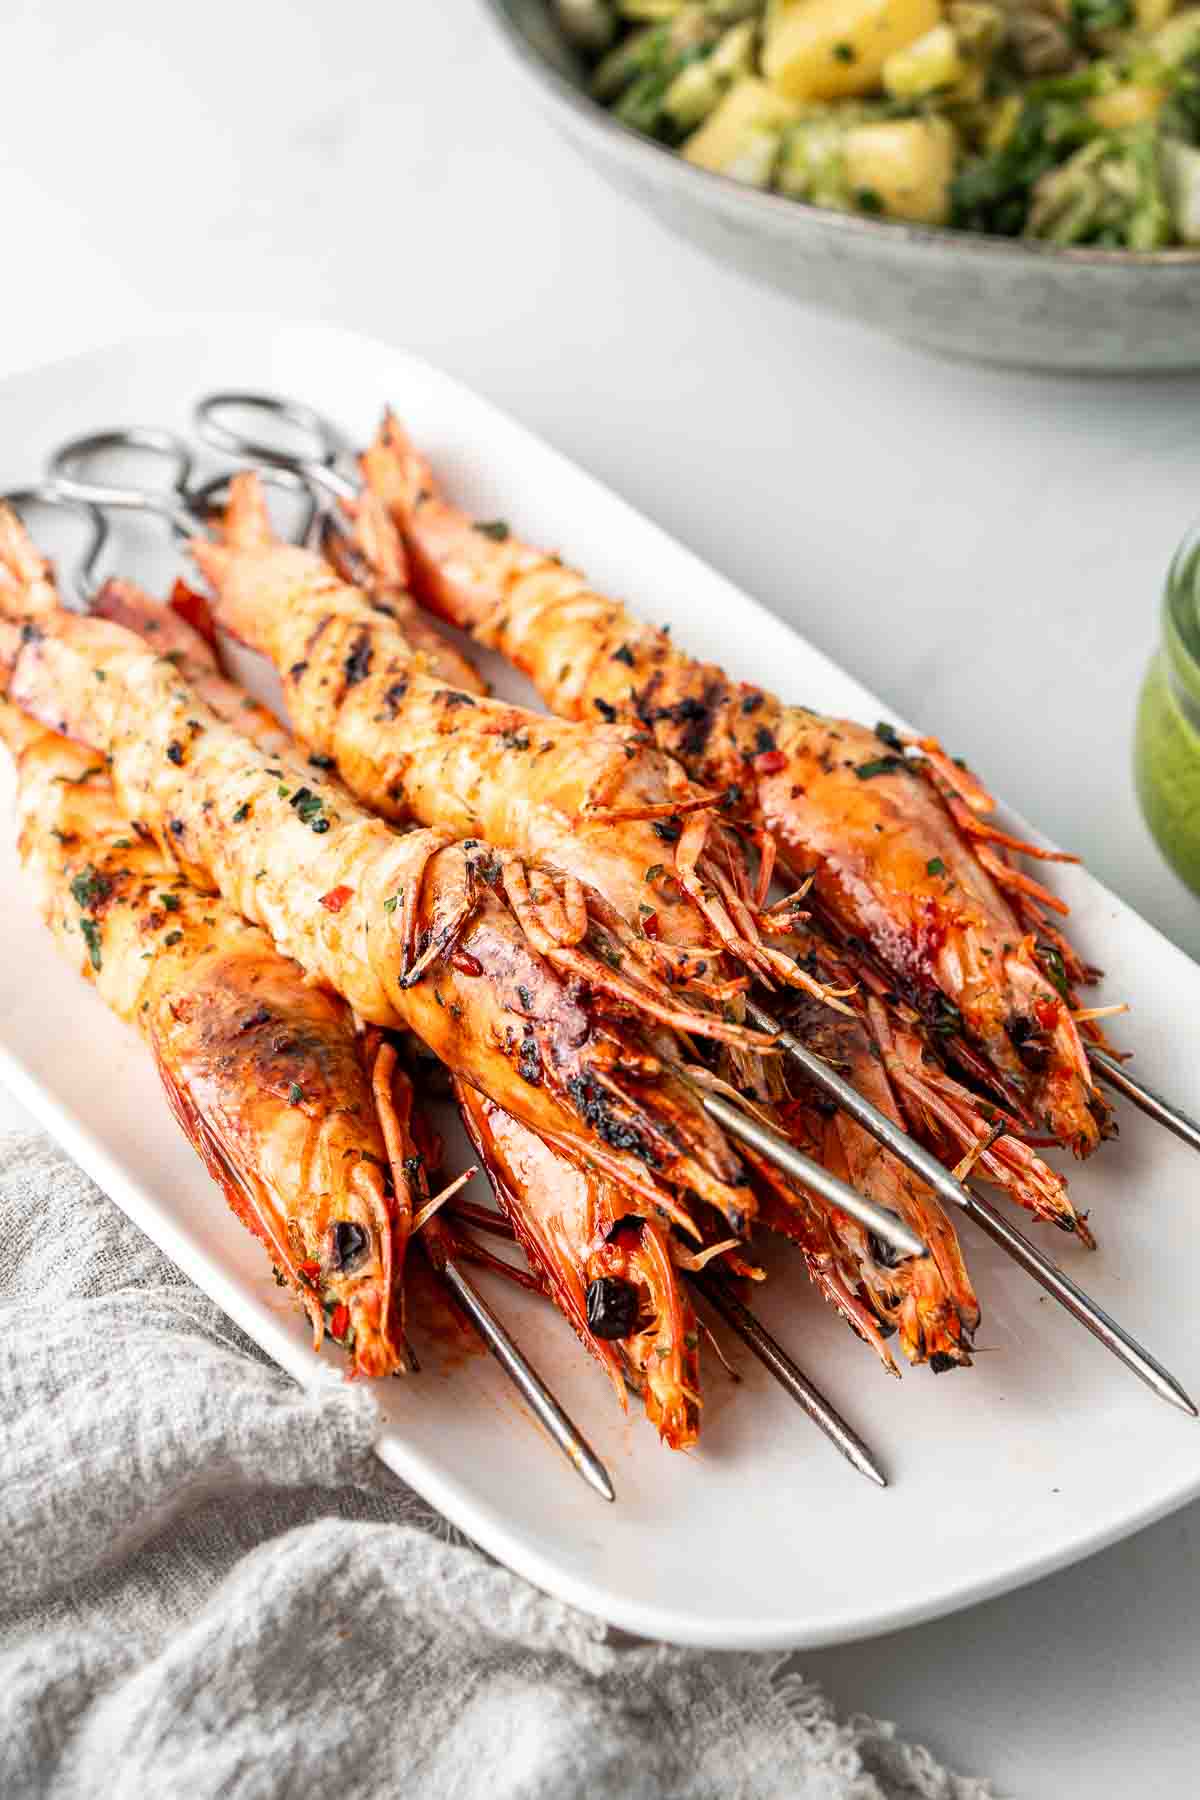 Grilled prawns on metal skewers on a white serving plate.